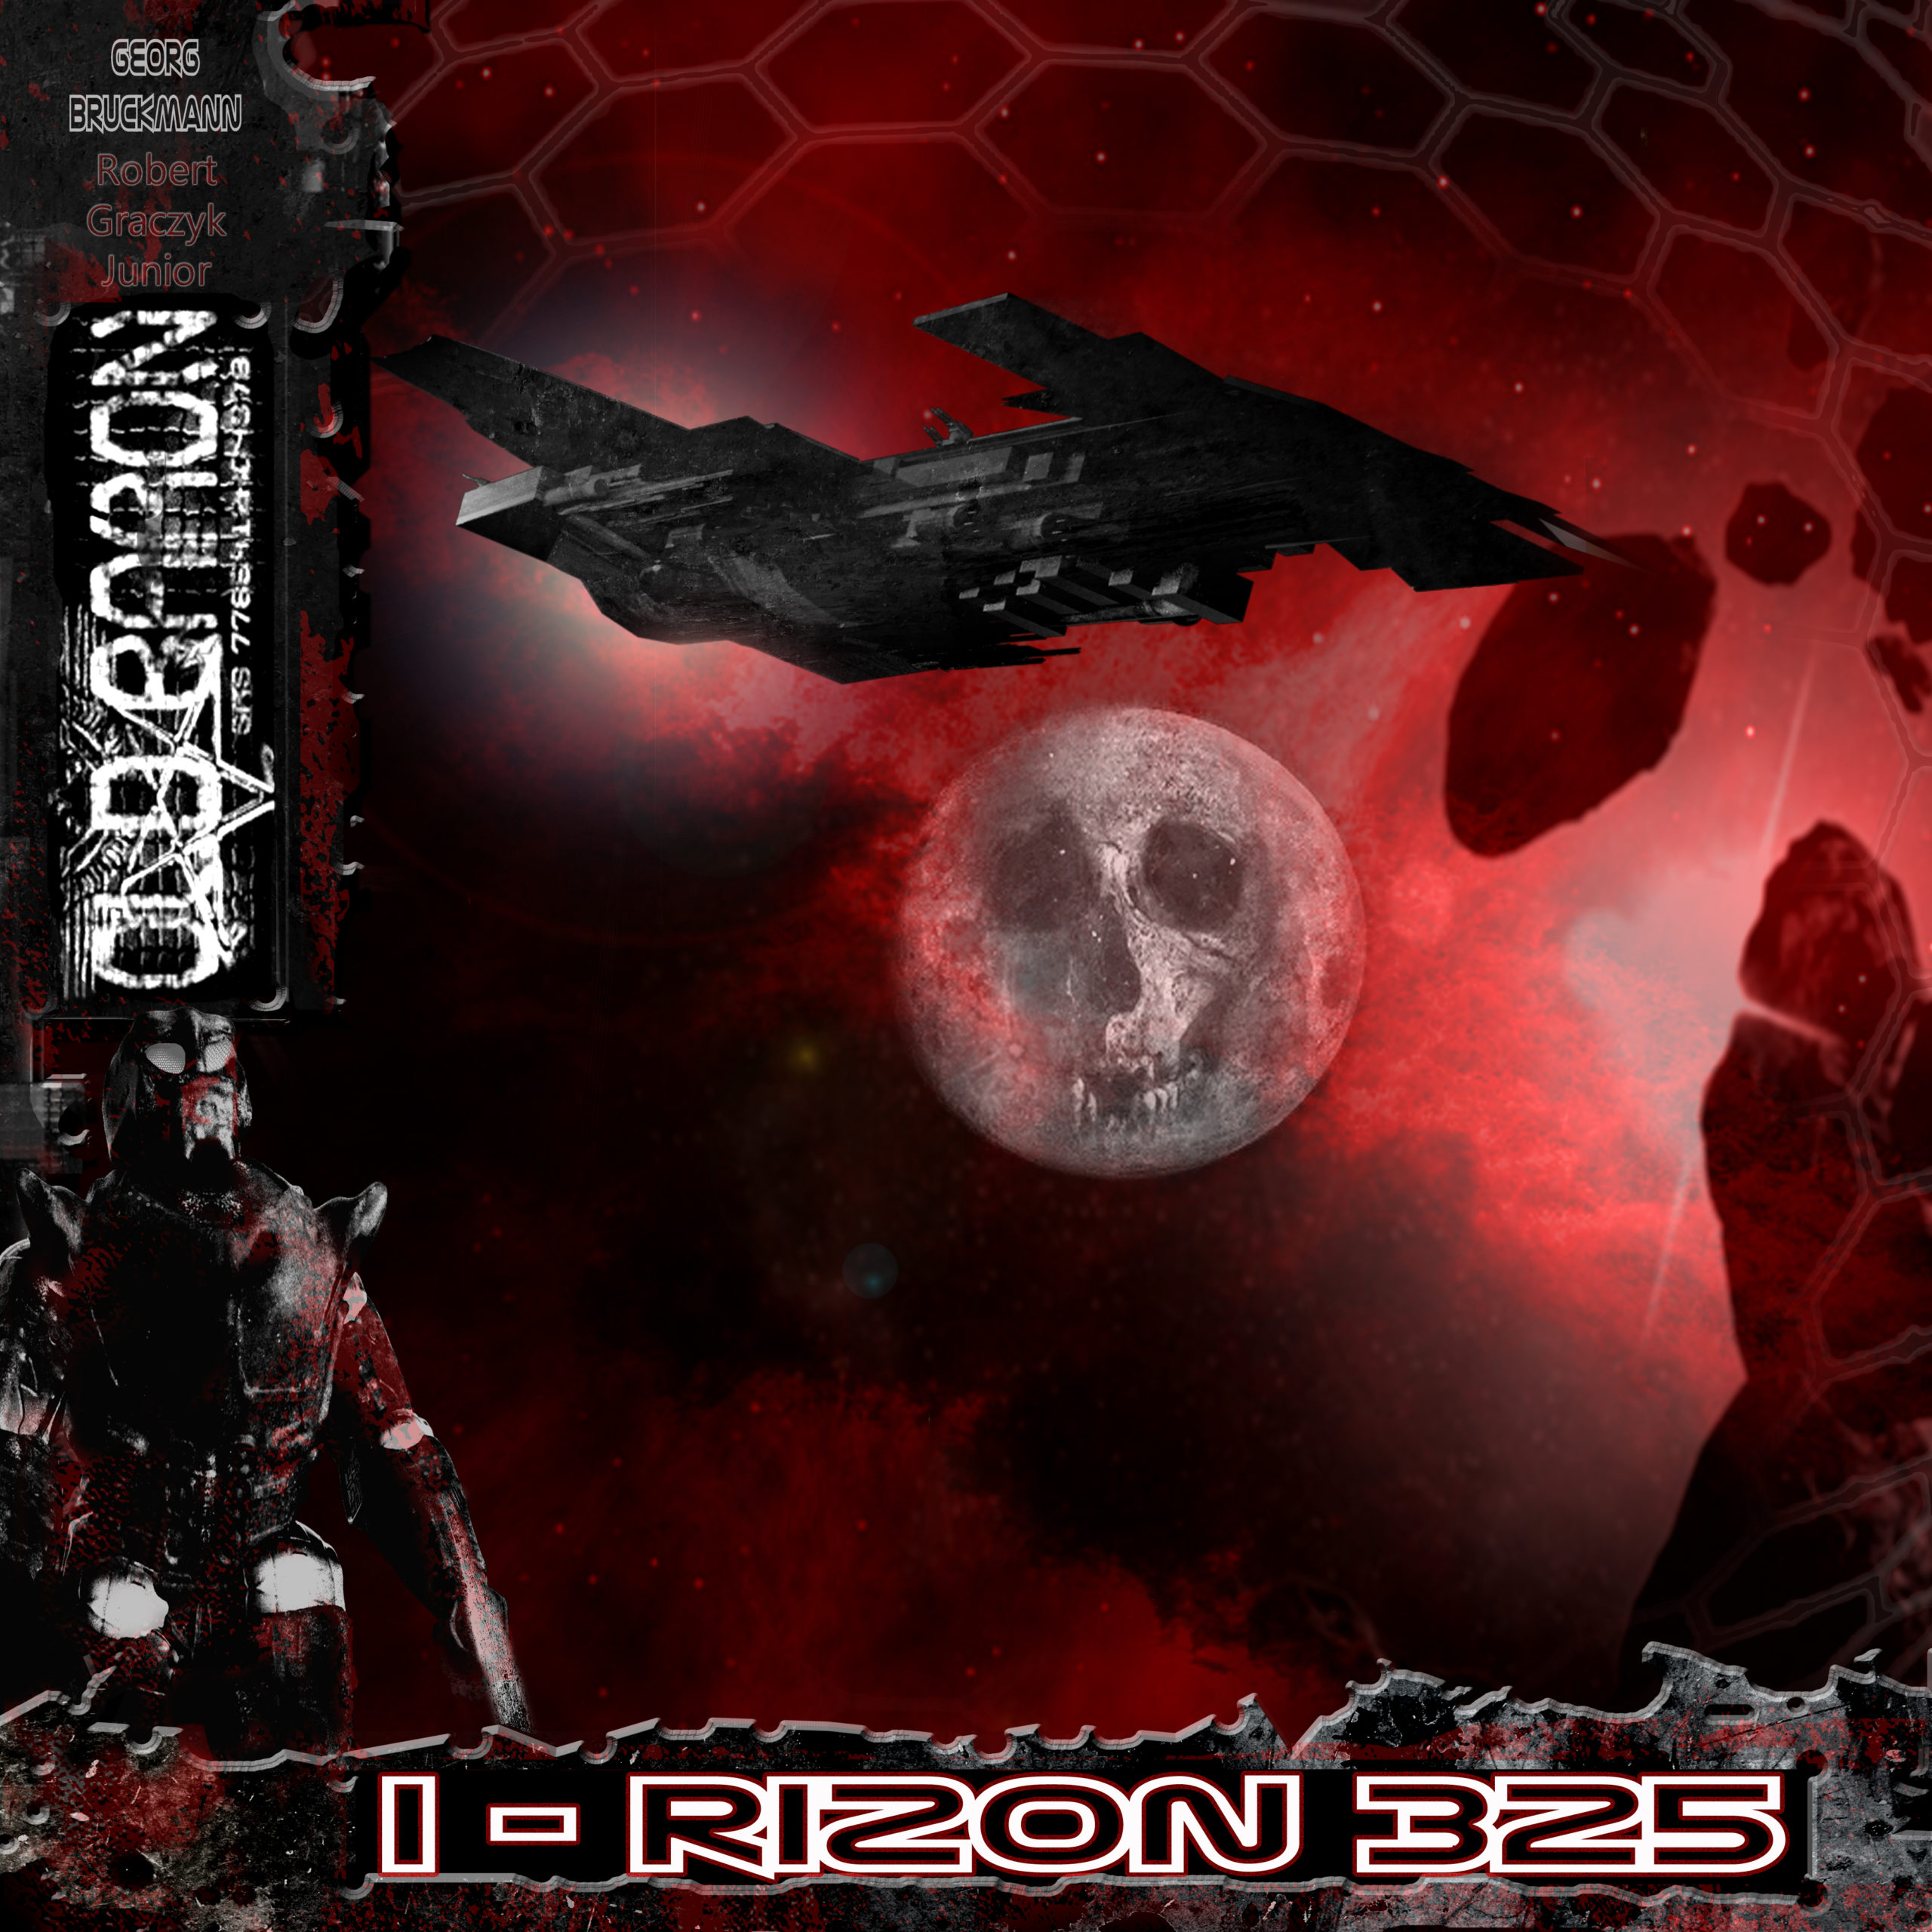 Rizon 325: OLD BARON - The Chronicles of the Red Rage - Episode 1